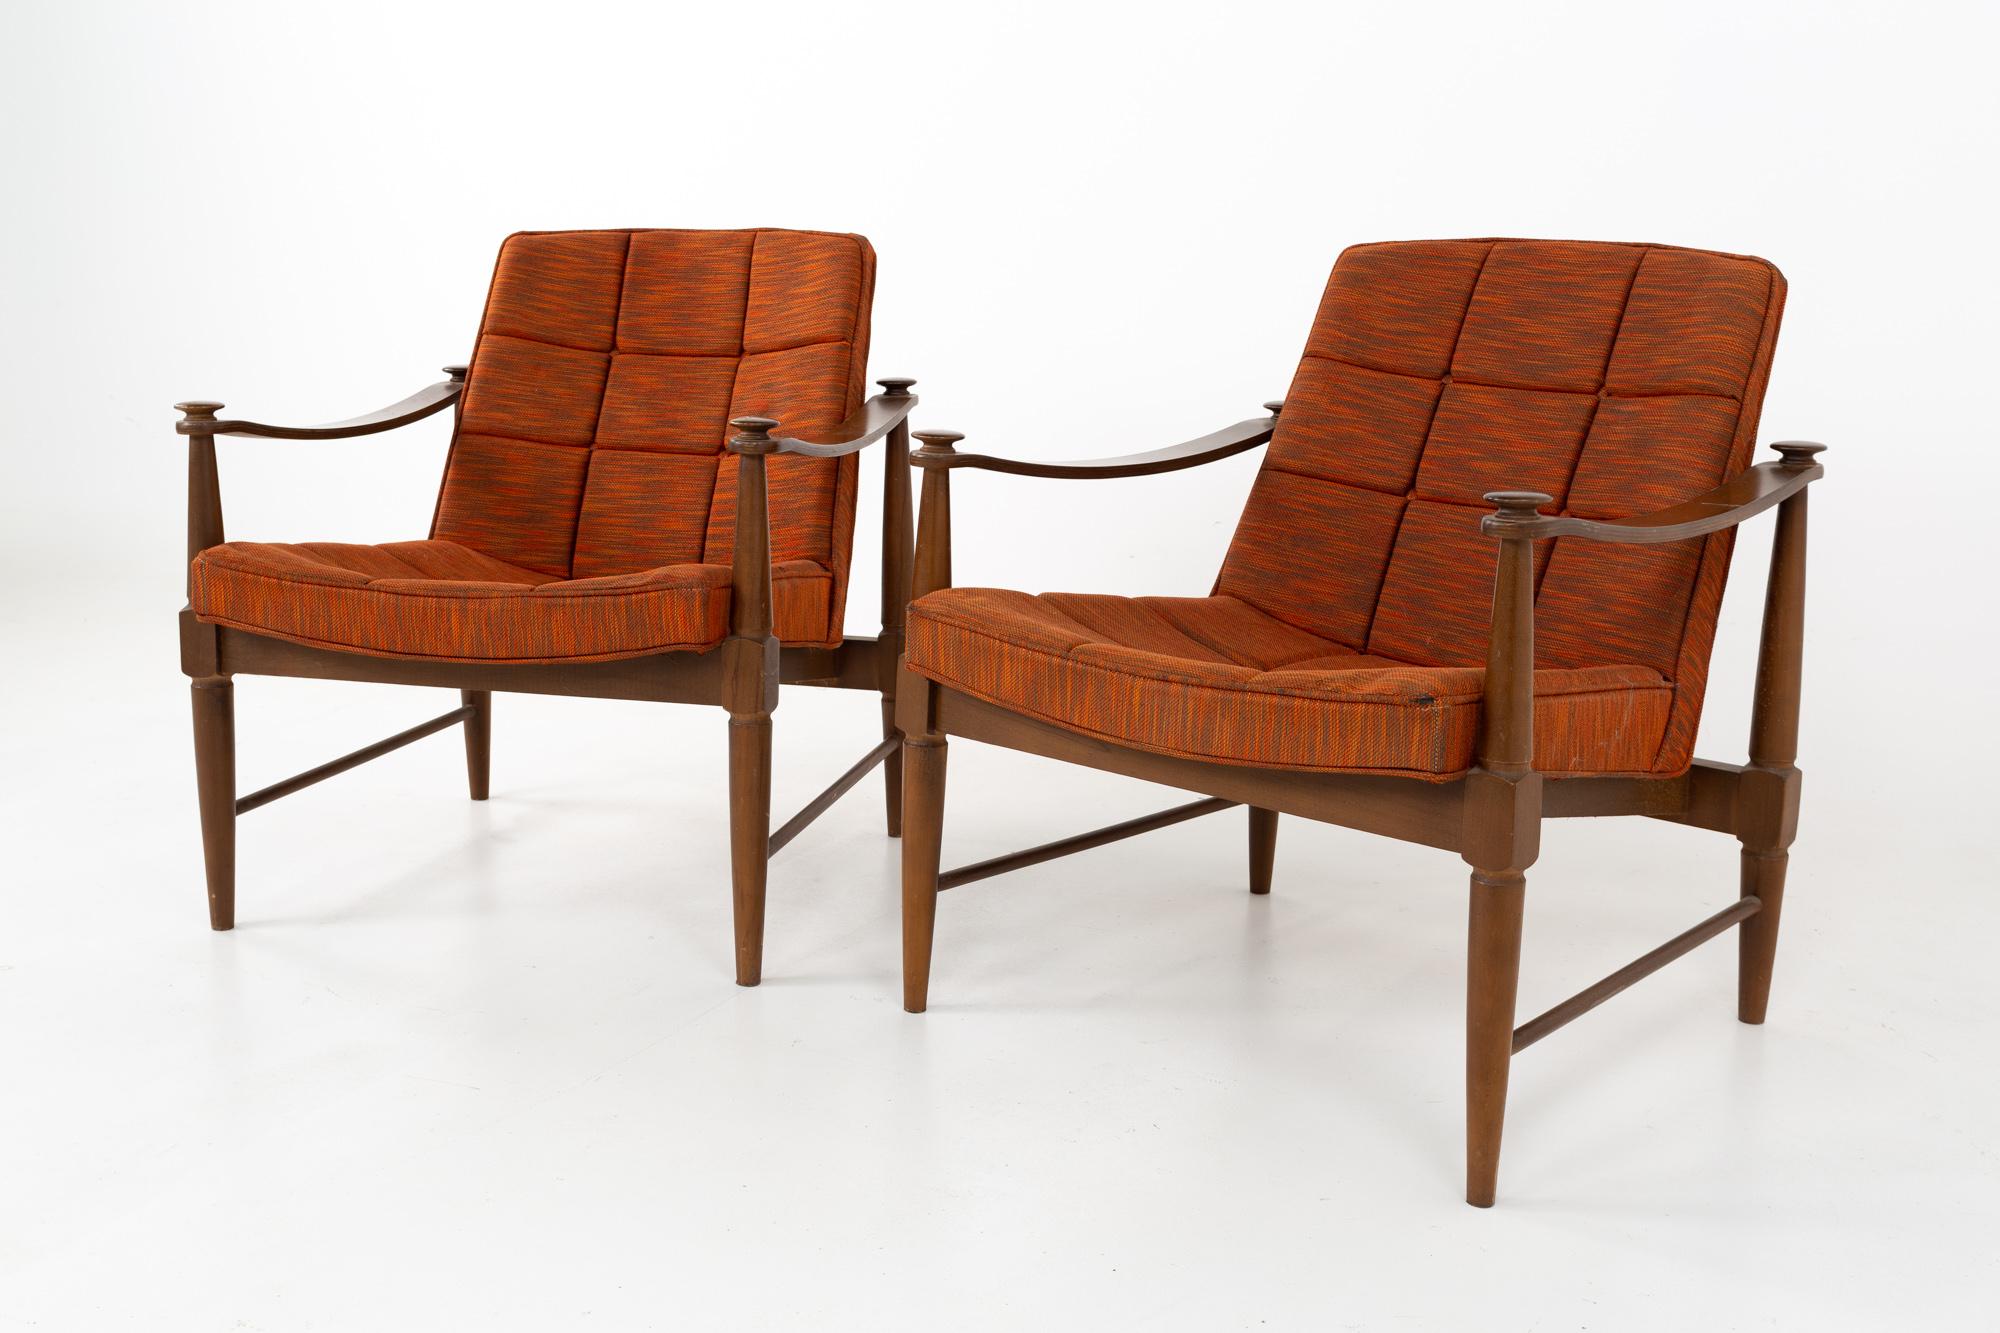 Murphy Miller mid century walnut lounge chairs - pair
These chairs are 26 wide x 29 deep x 29.5 inches high, with a seat height of 16 and arm height of 22.5 inches

All pieces of furniture can be had in what we call restored vintage condition.